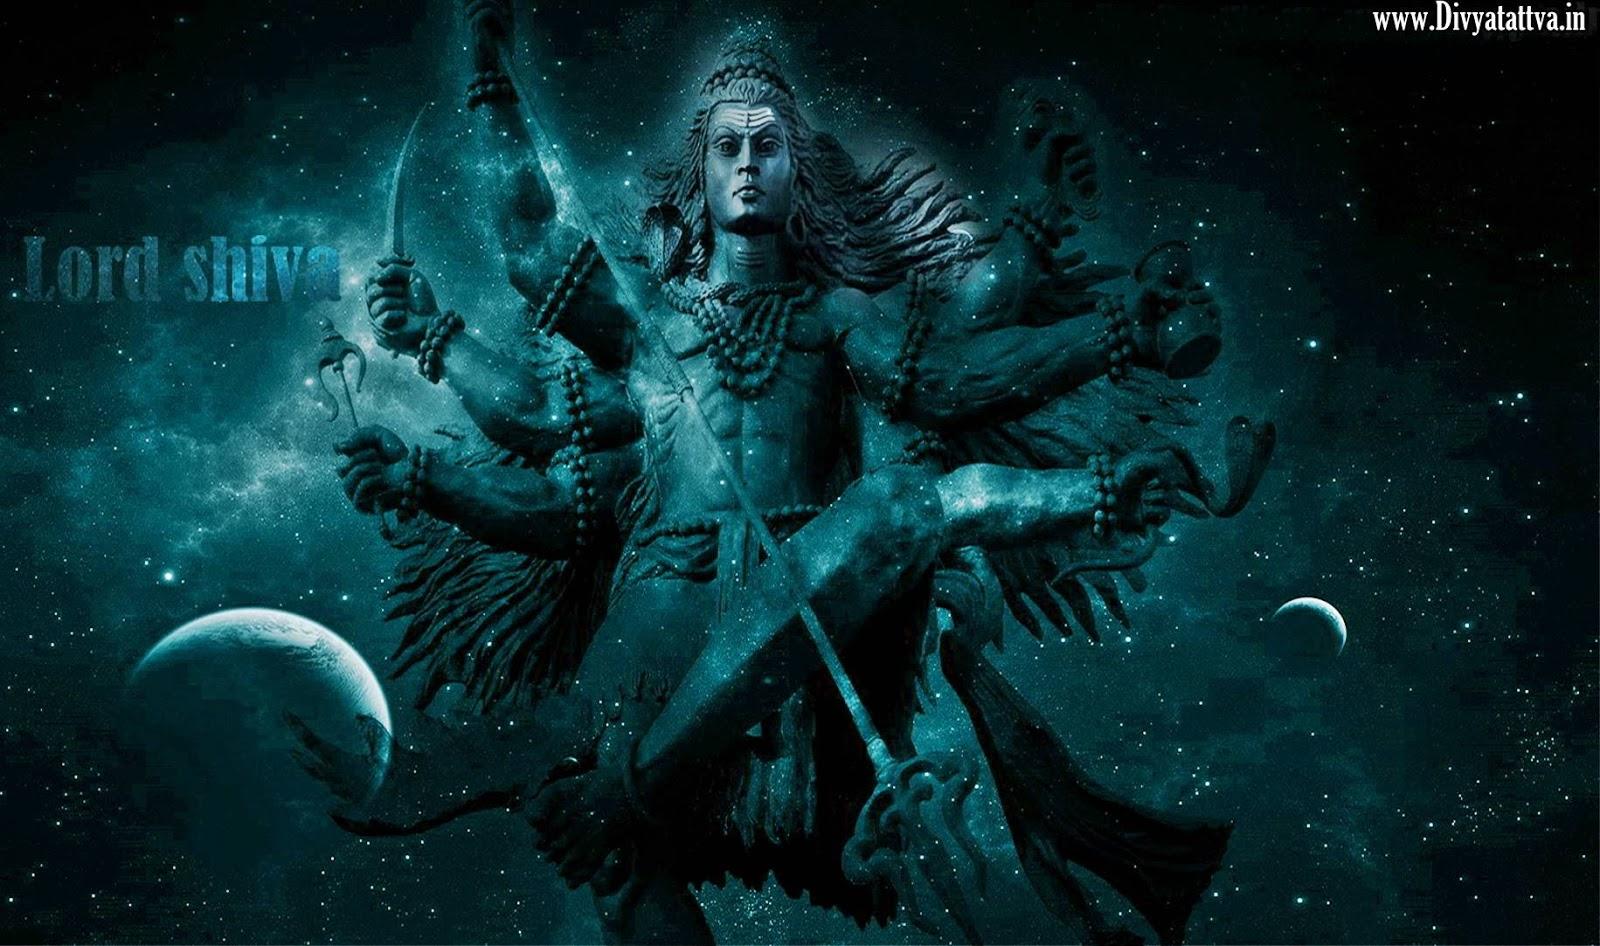 High Definition Angry Lord Shiva 3D Wallpaper HD